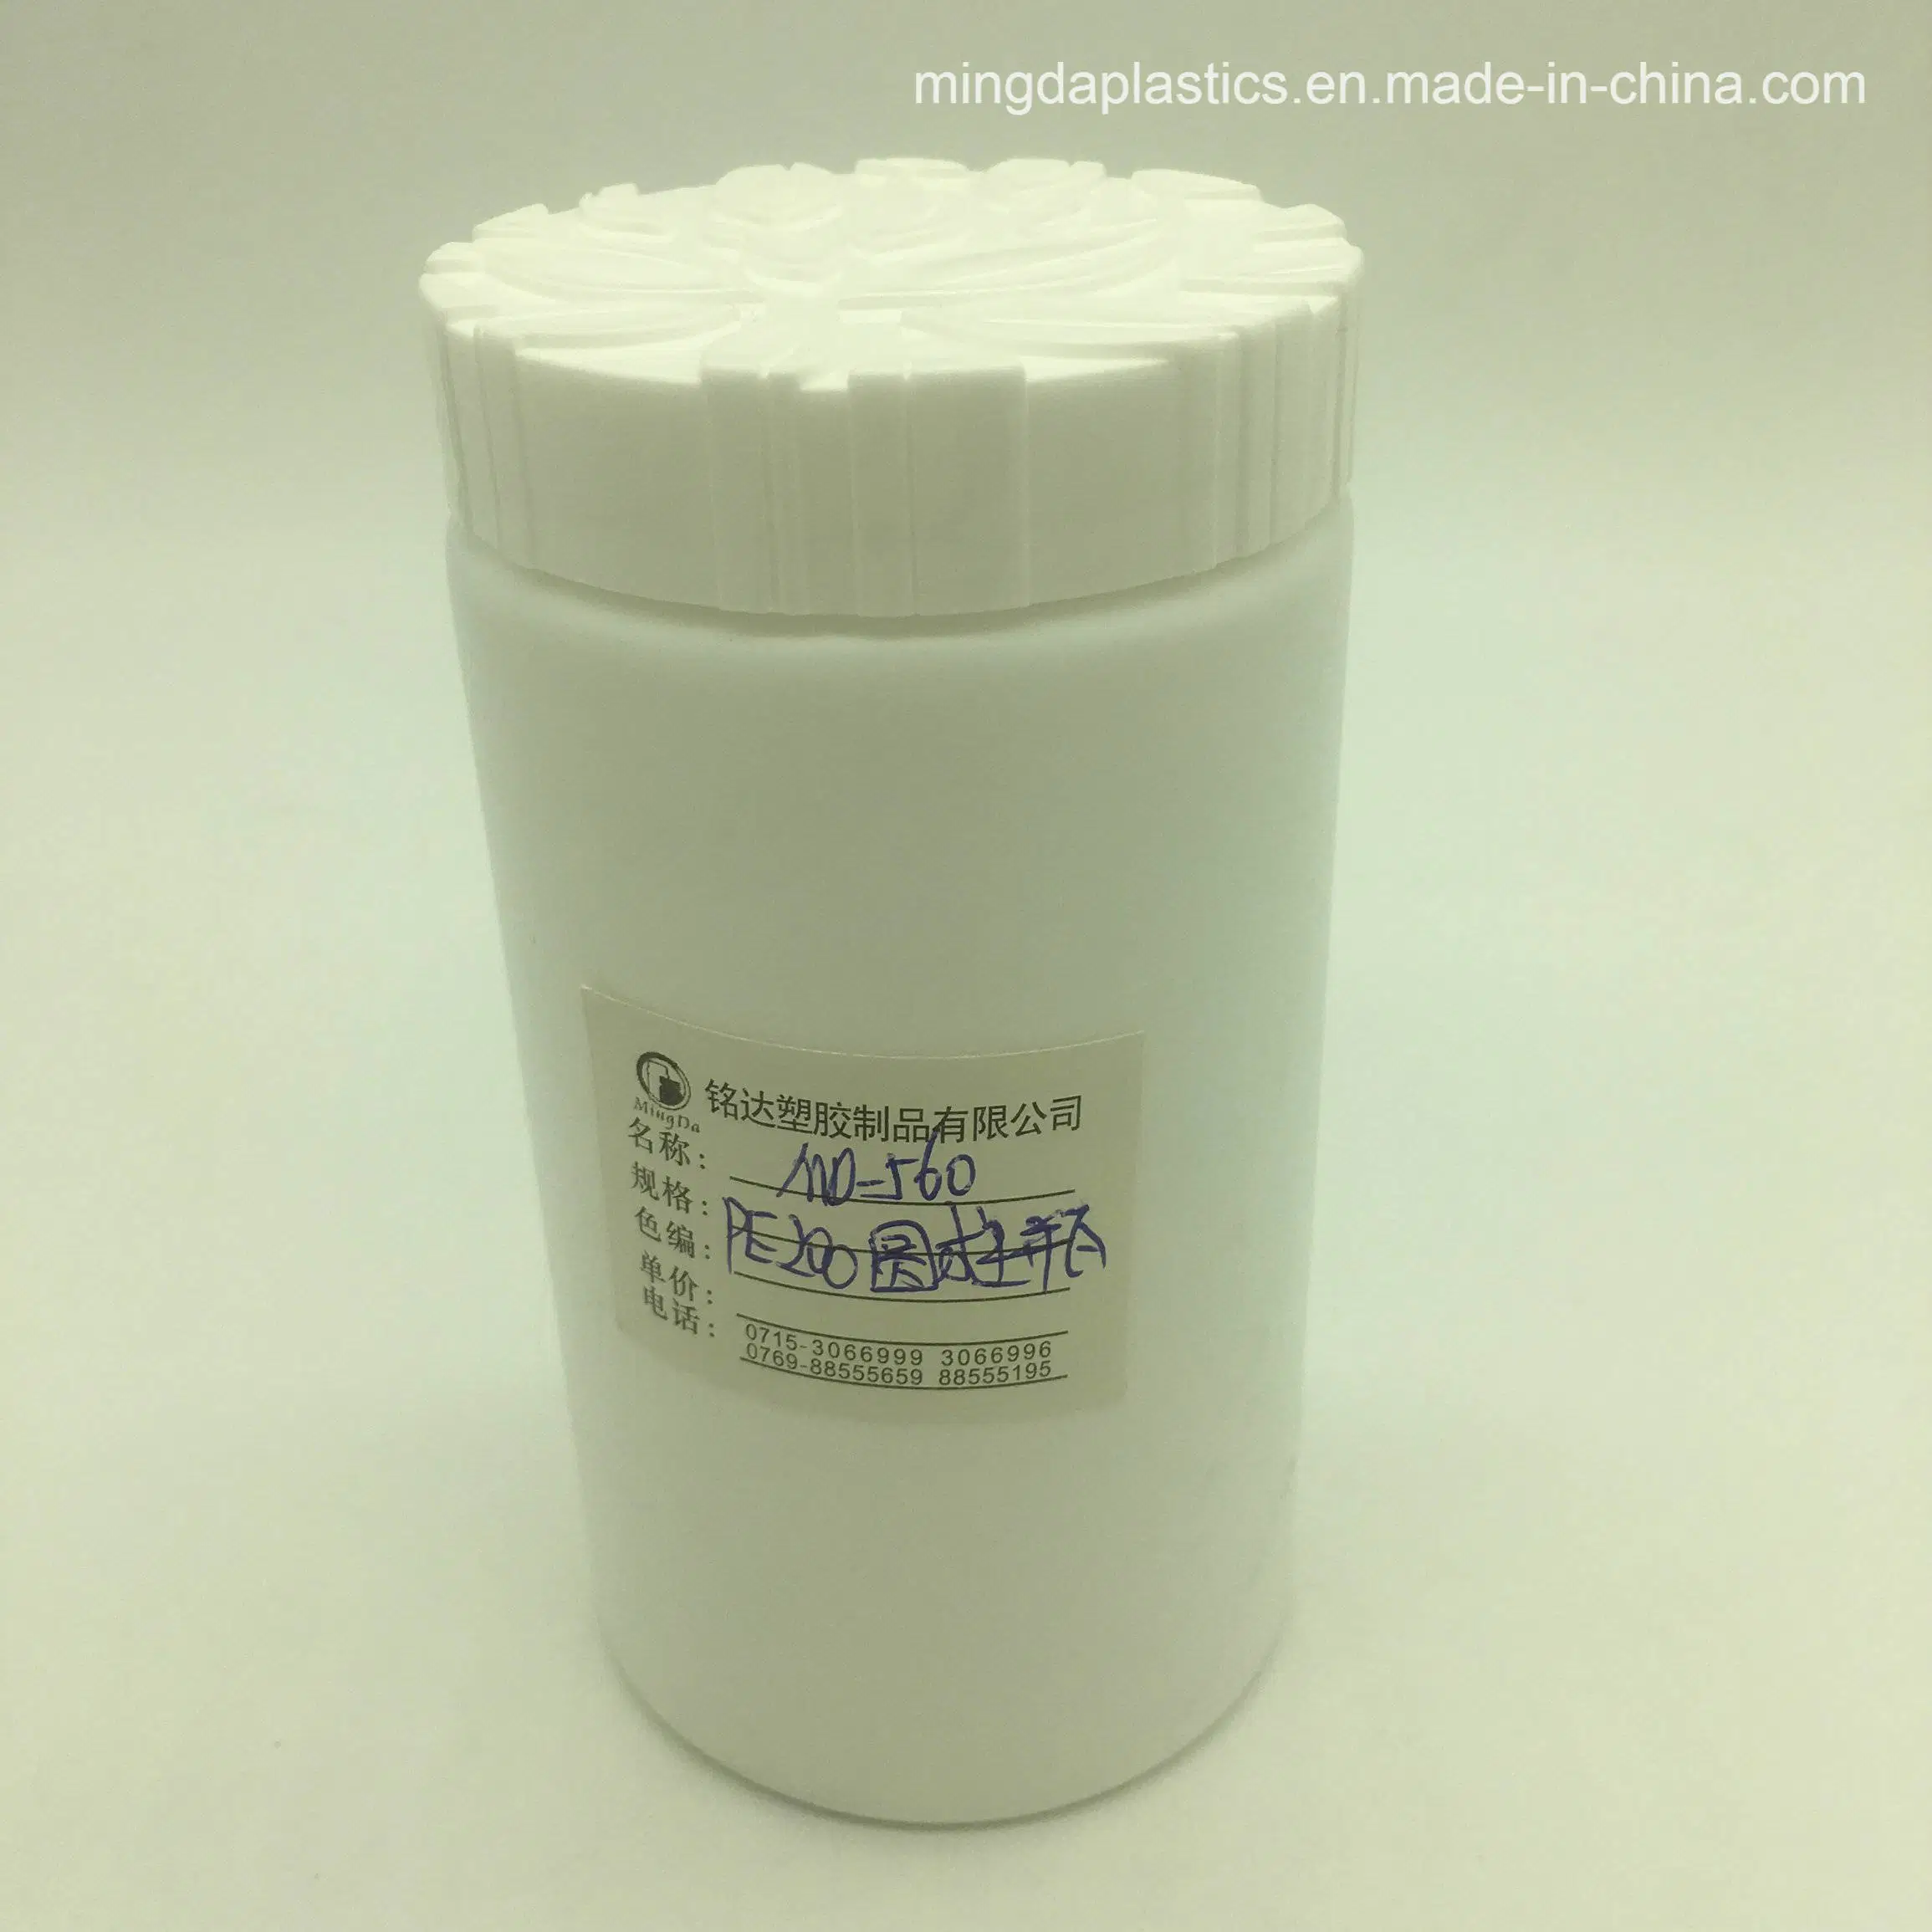 MD-560 China Supplier HDPE/Pet Medicine/Food/Health Care Products Plastic Bottles